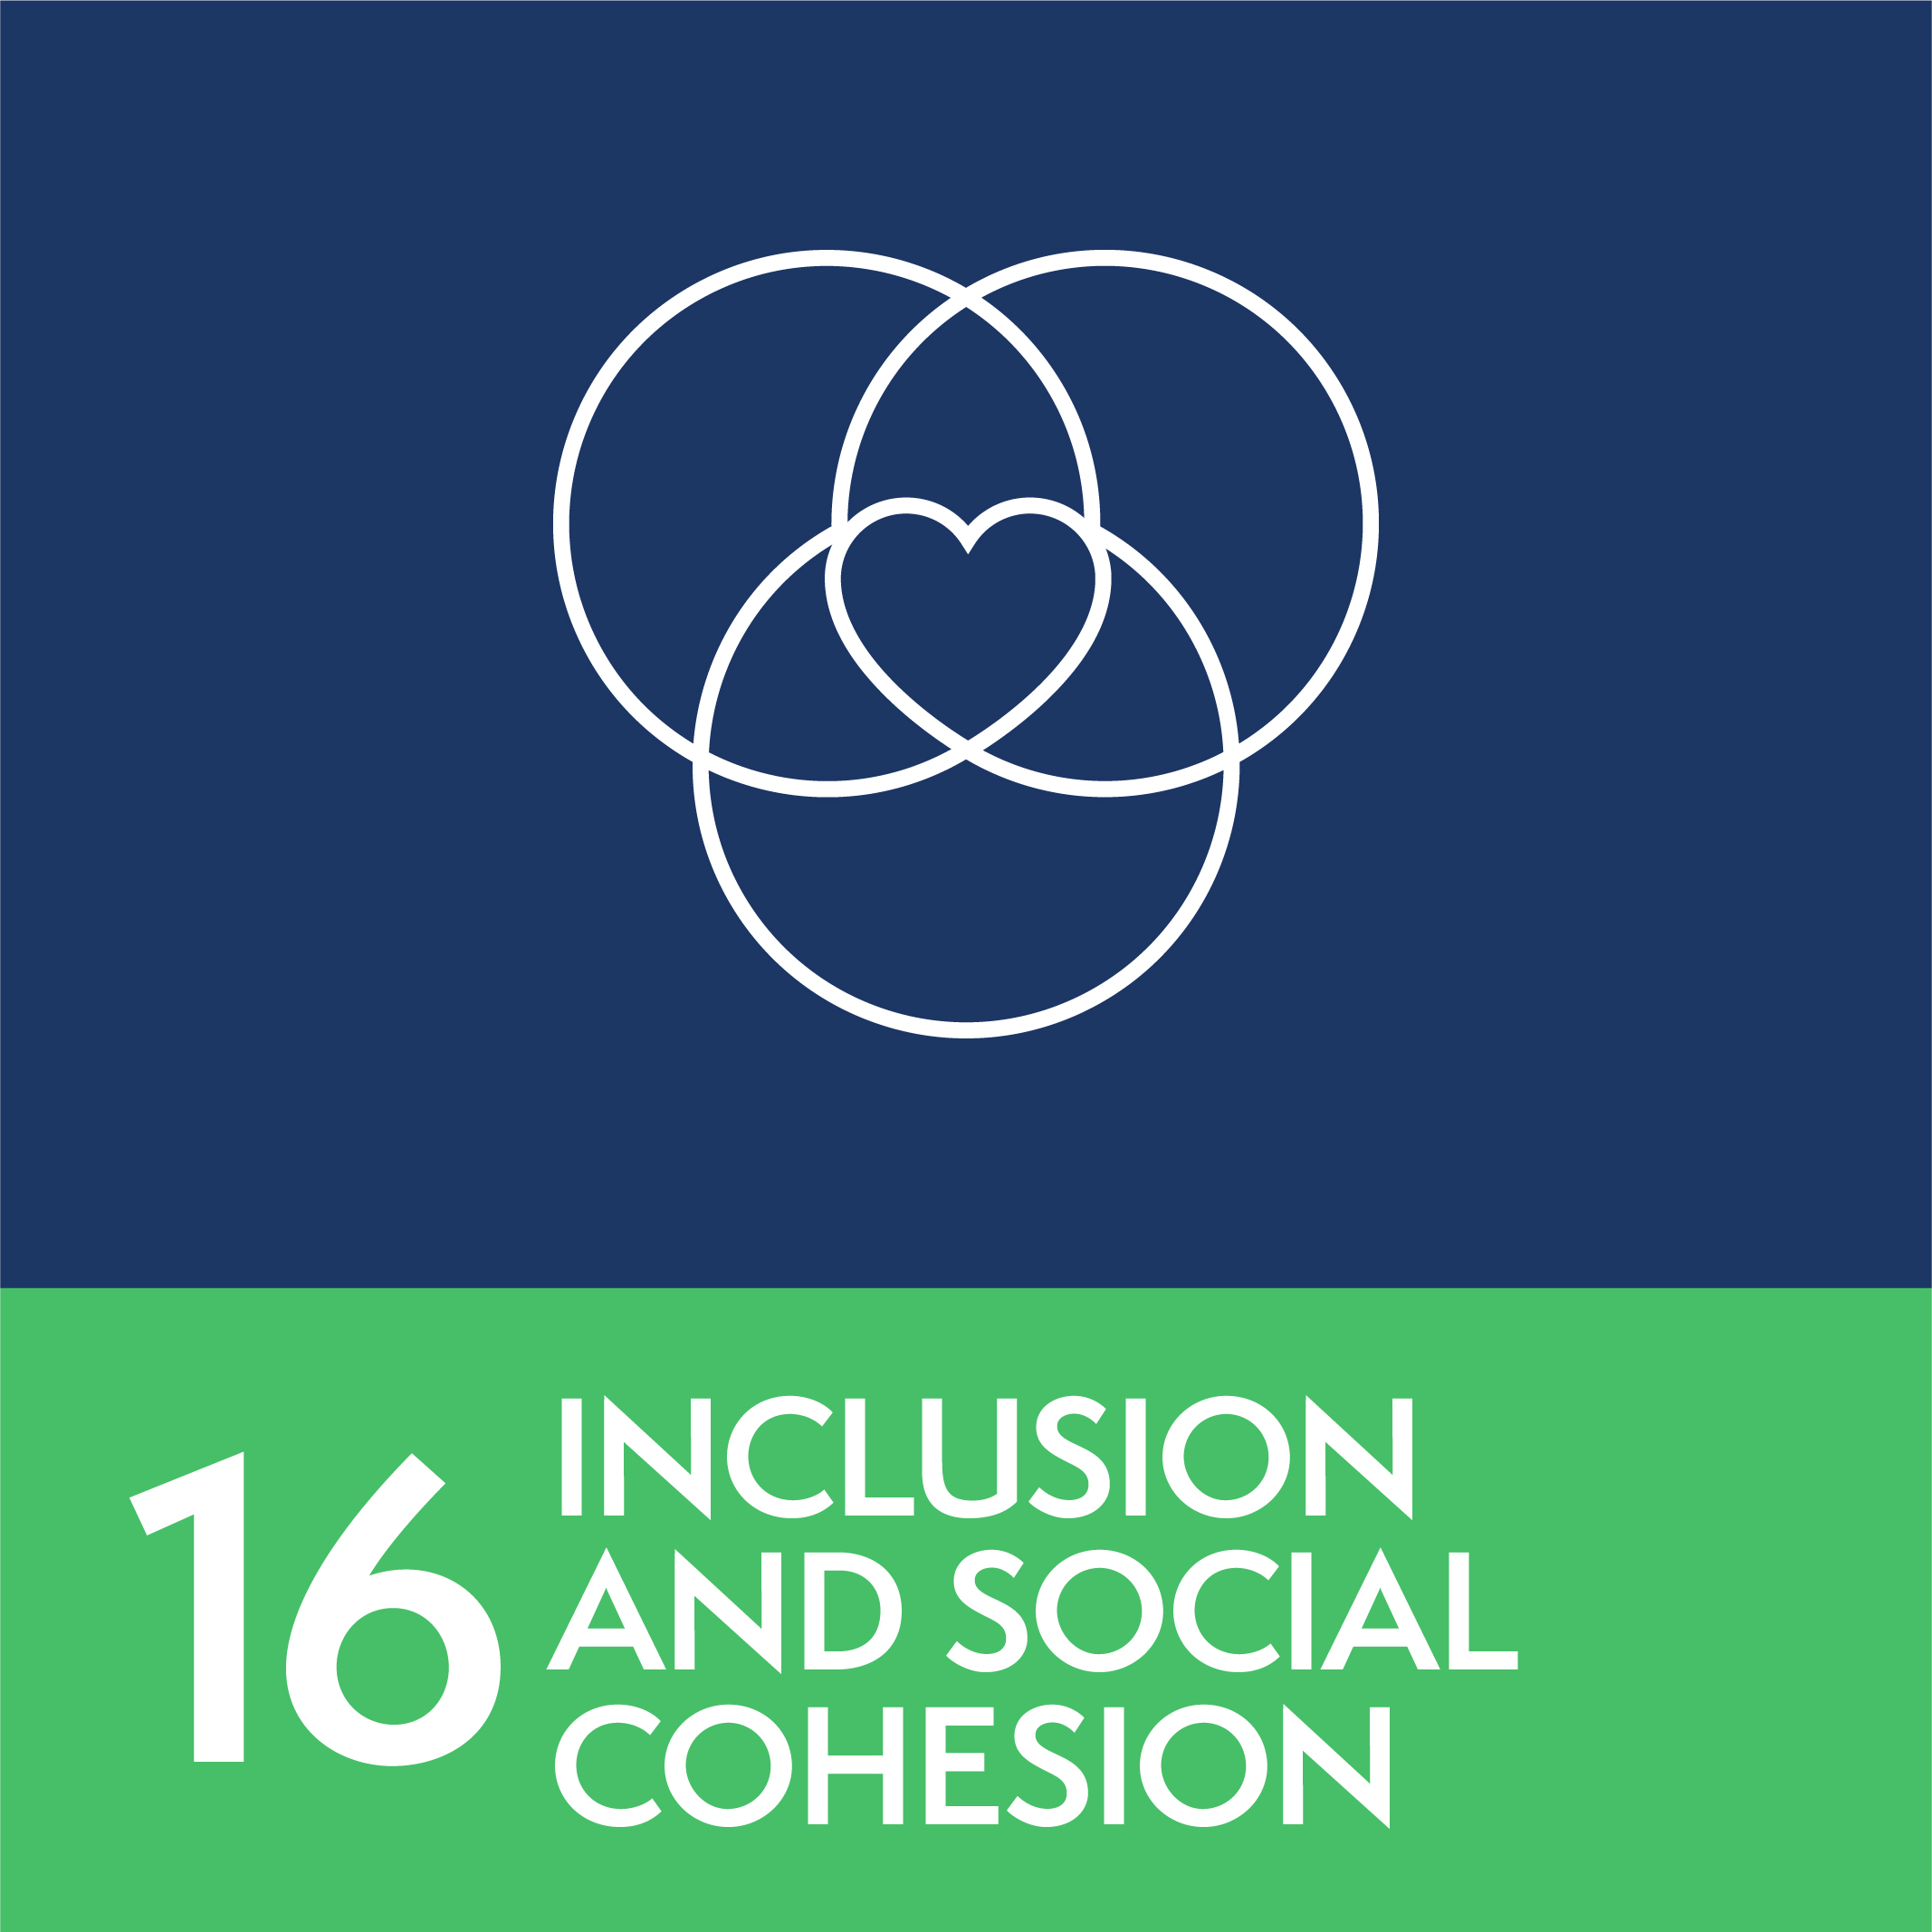 16 - inclusion and social cohesion